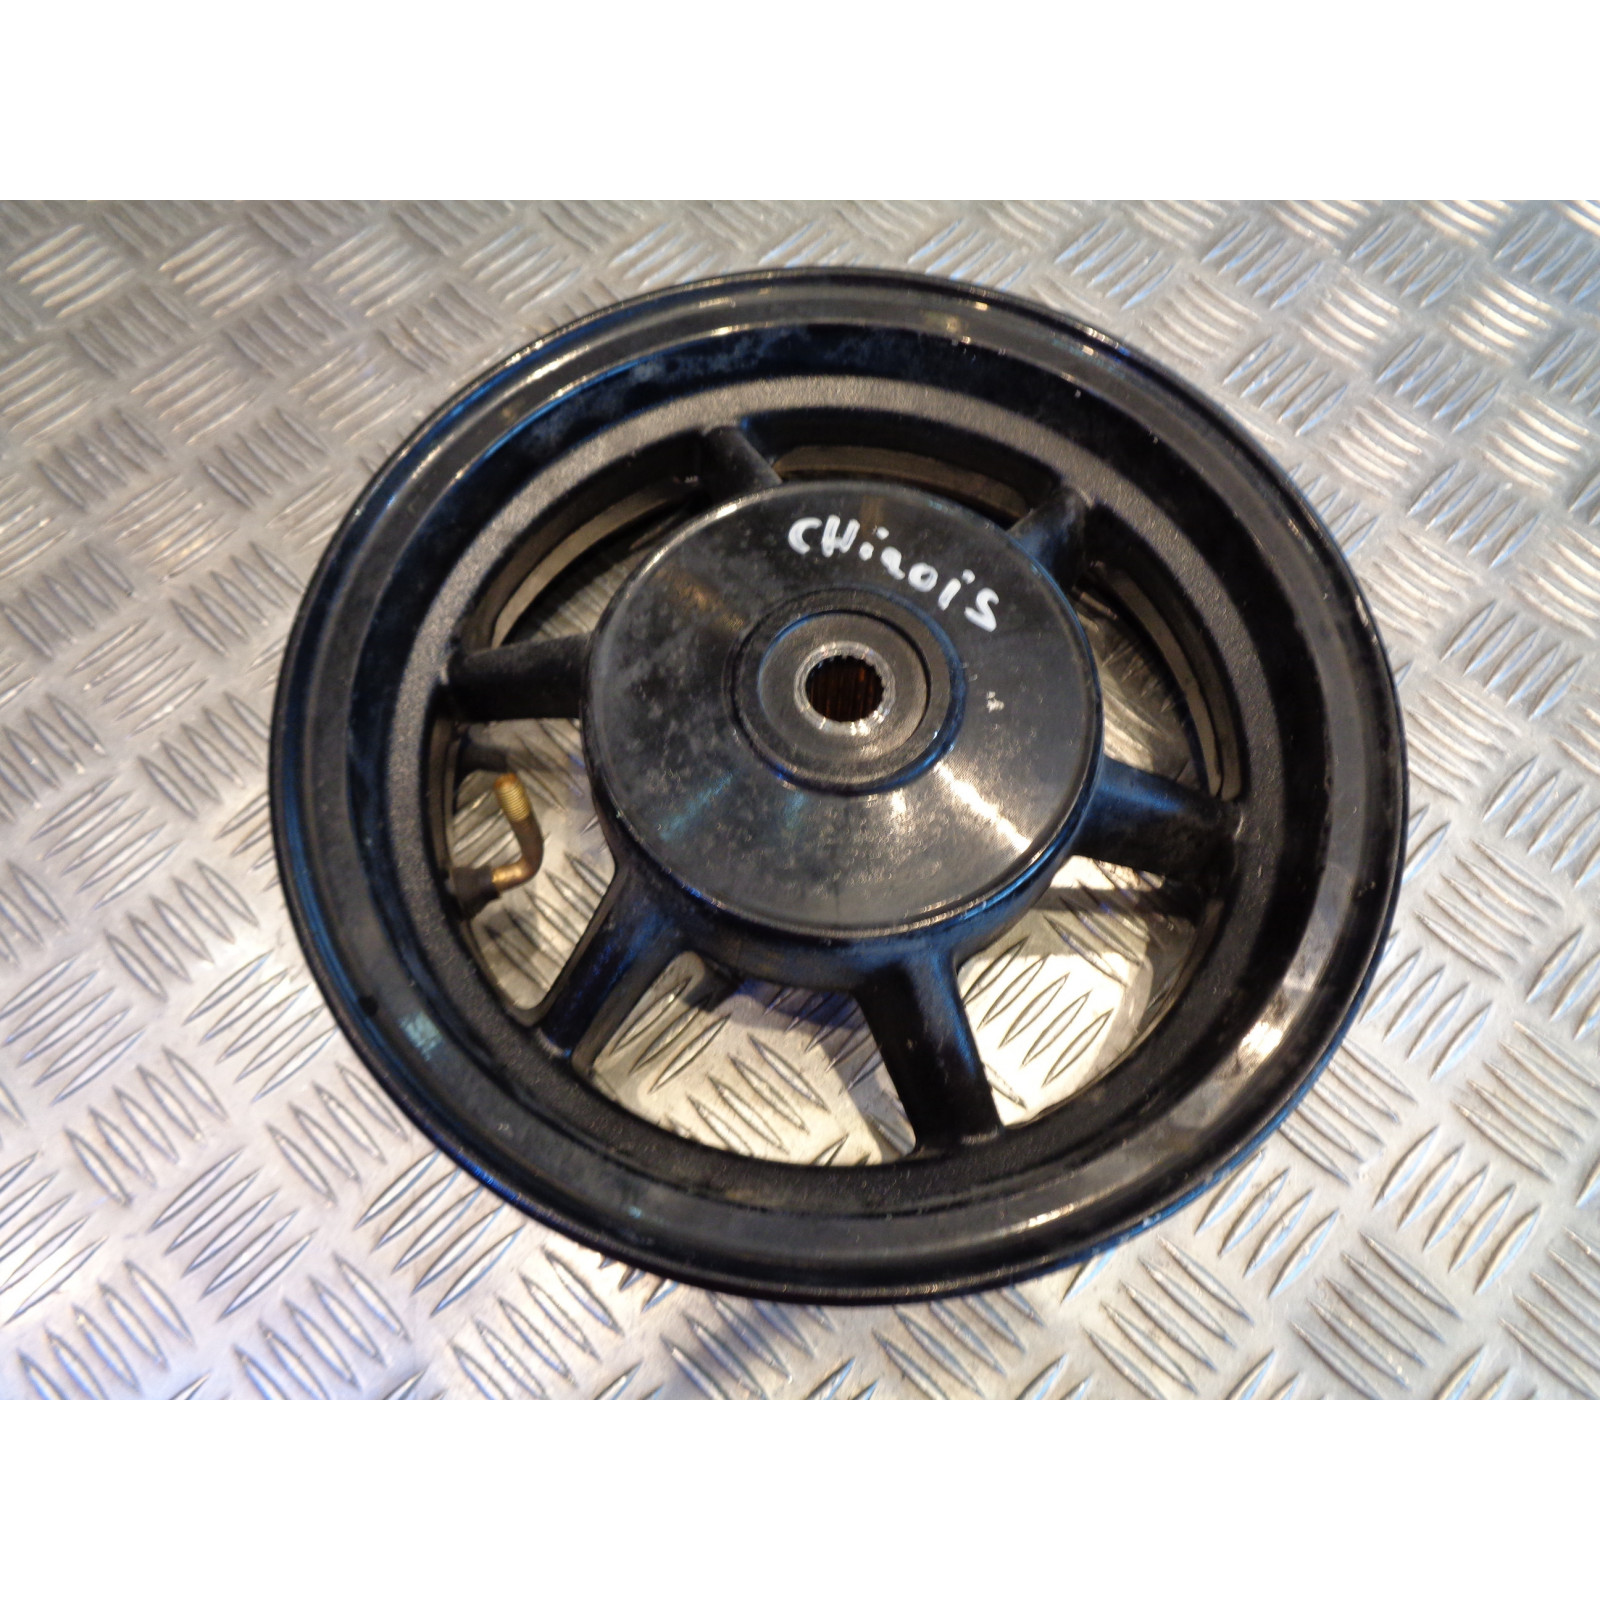 Roue jante arriere scooter 2.50x10 scooter longjia luxxon chinois